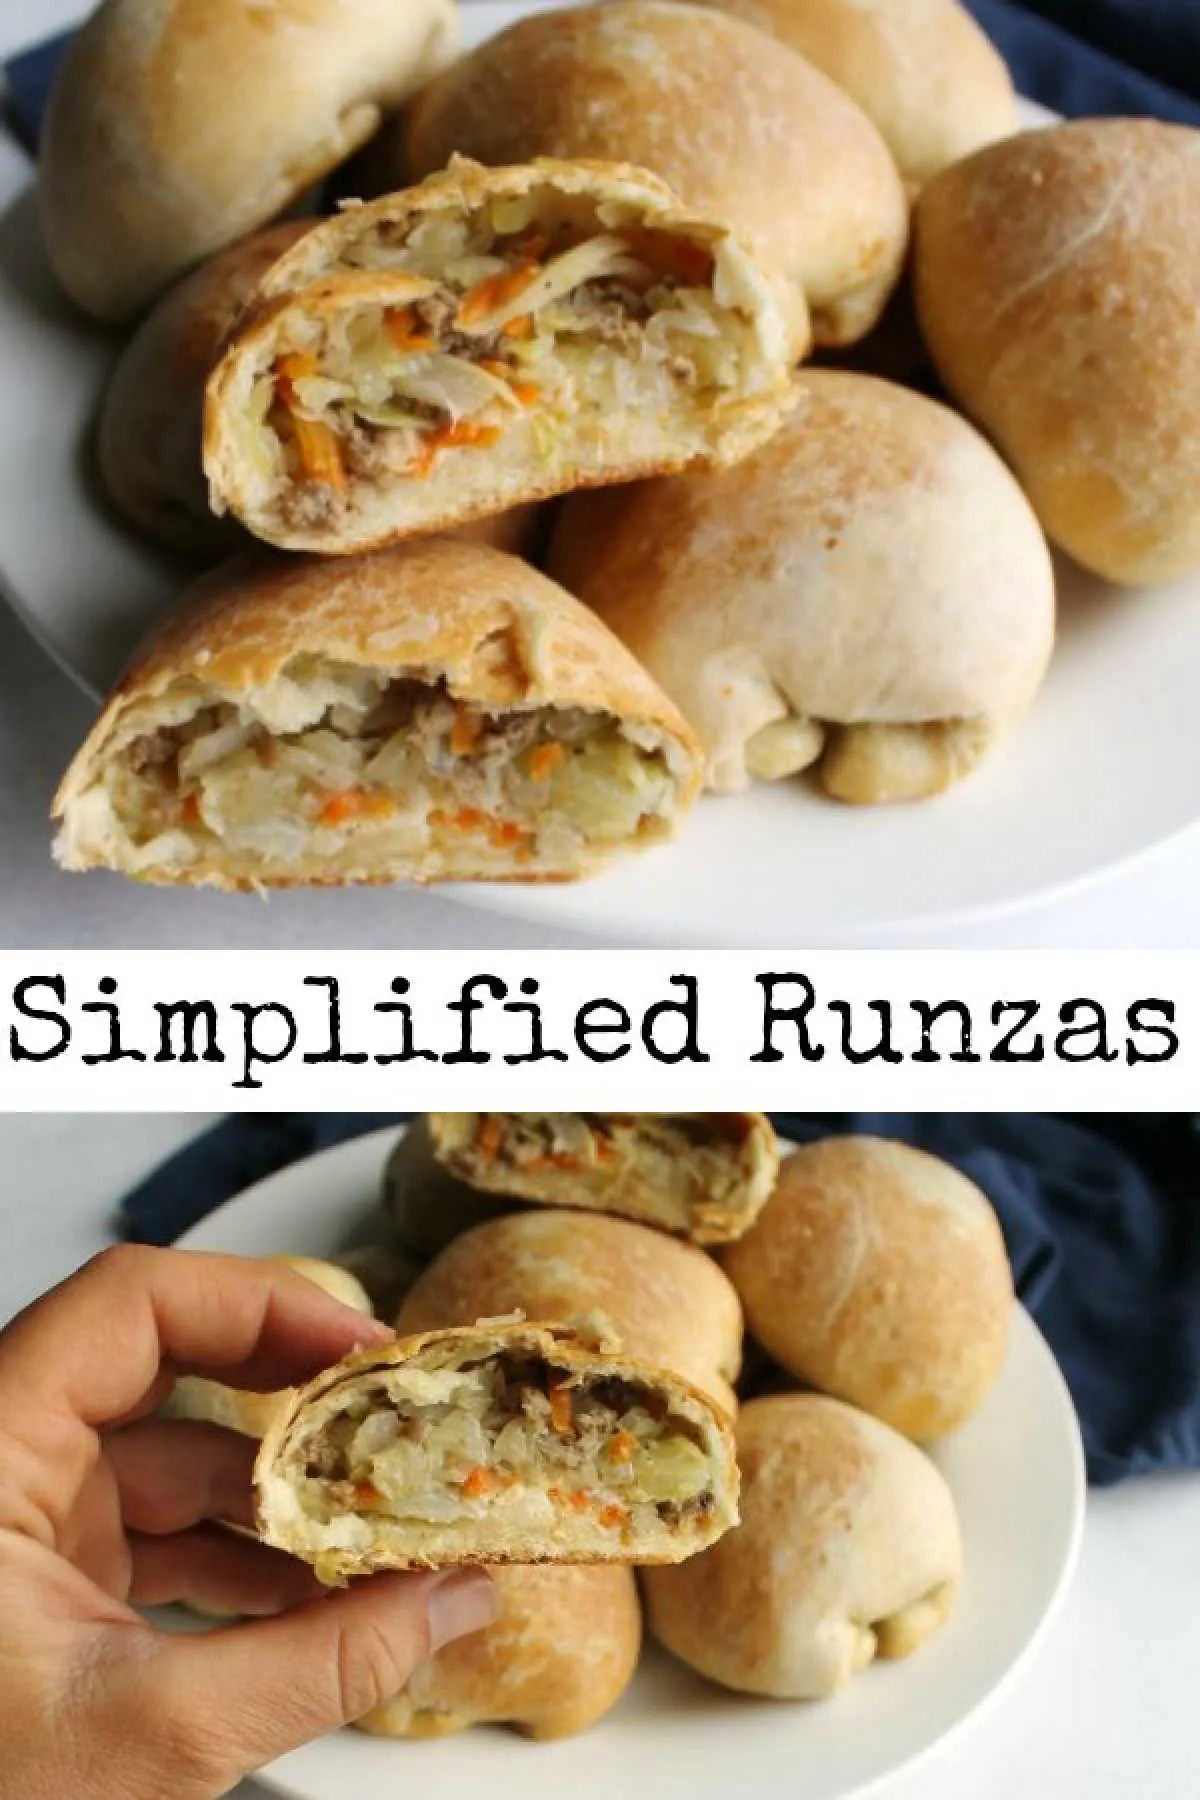 Soft butter bread stuffed with ground beef, cabbage and cheese make runzas delicious. This simplified recipe also makes them a lot quicker and easier!